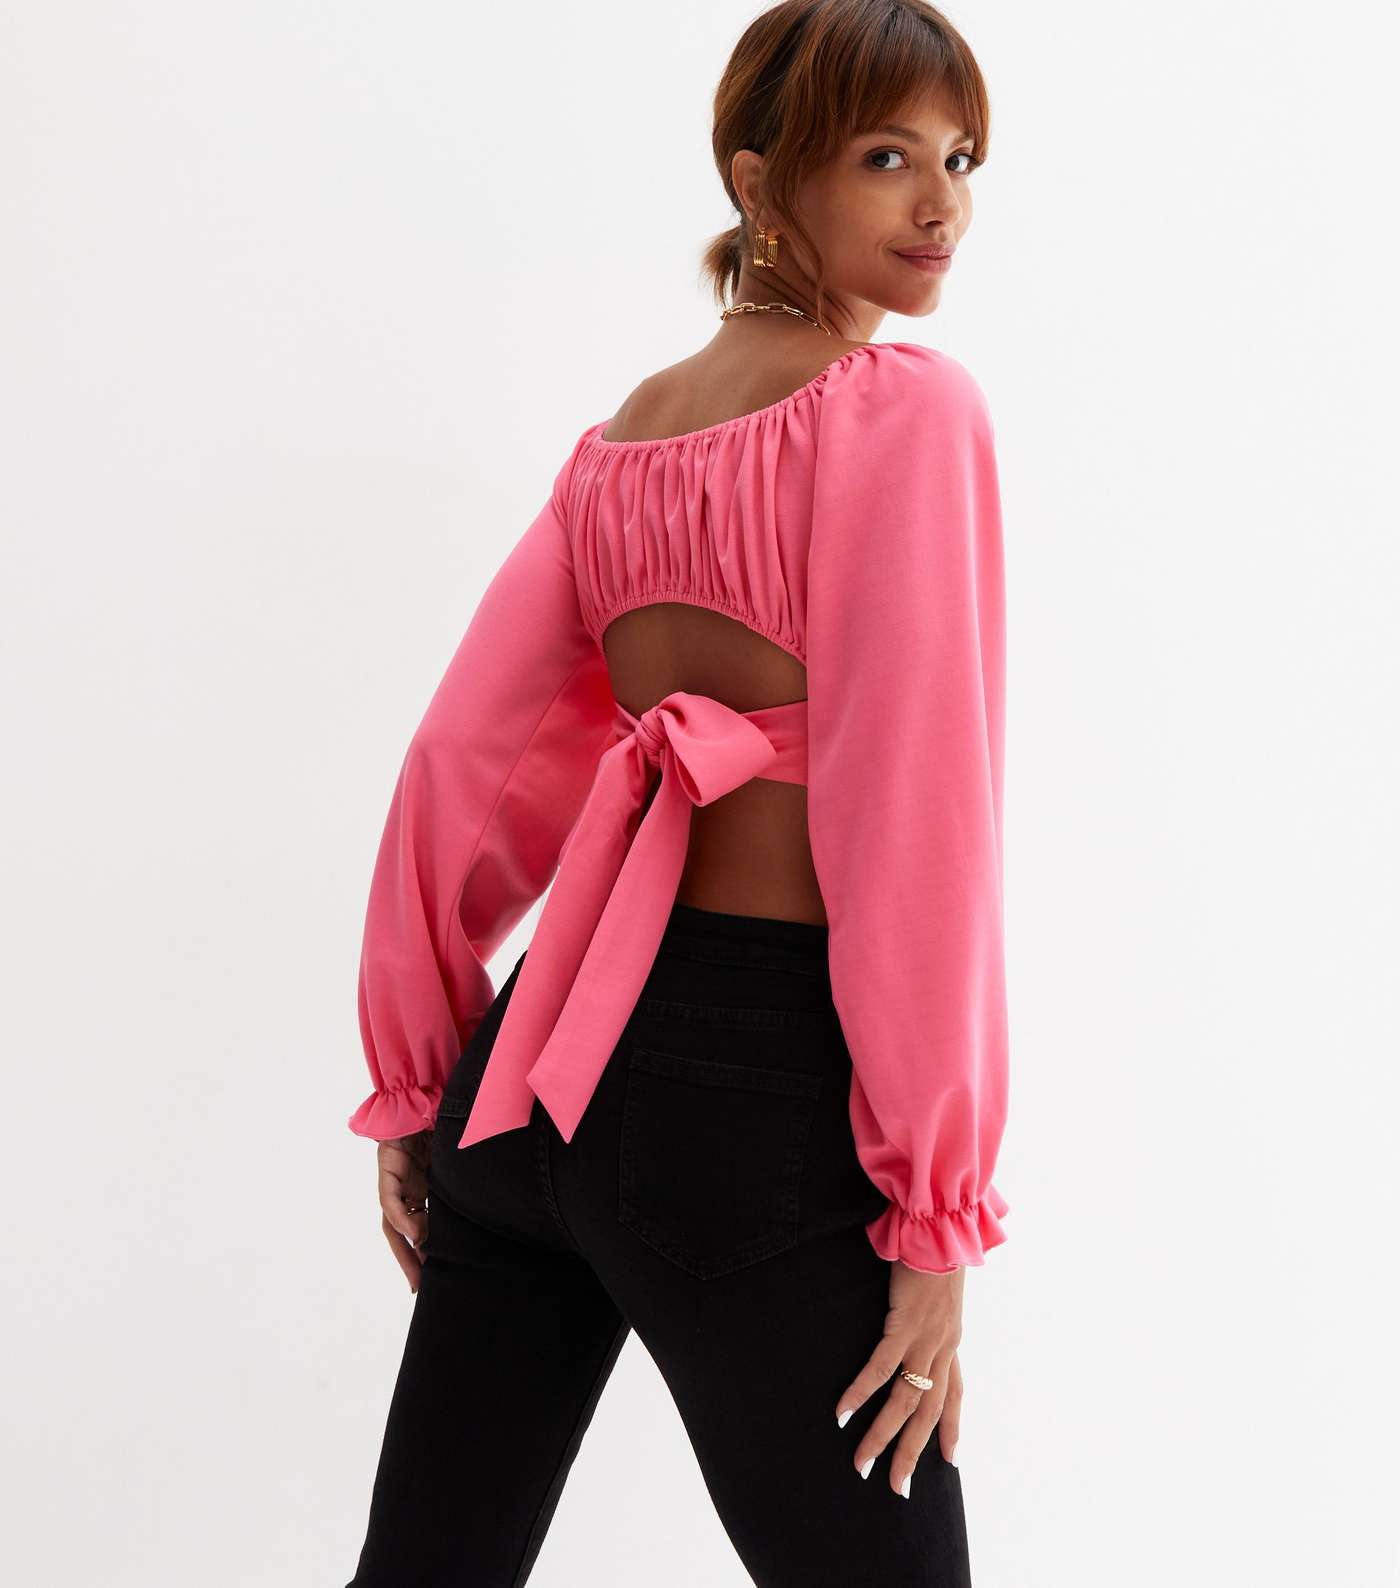 Cameo Rose Bright Pink Long Puff Sleeve Tie Back Crop Top